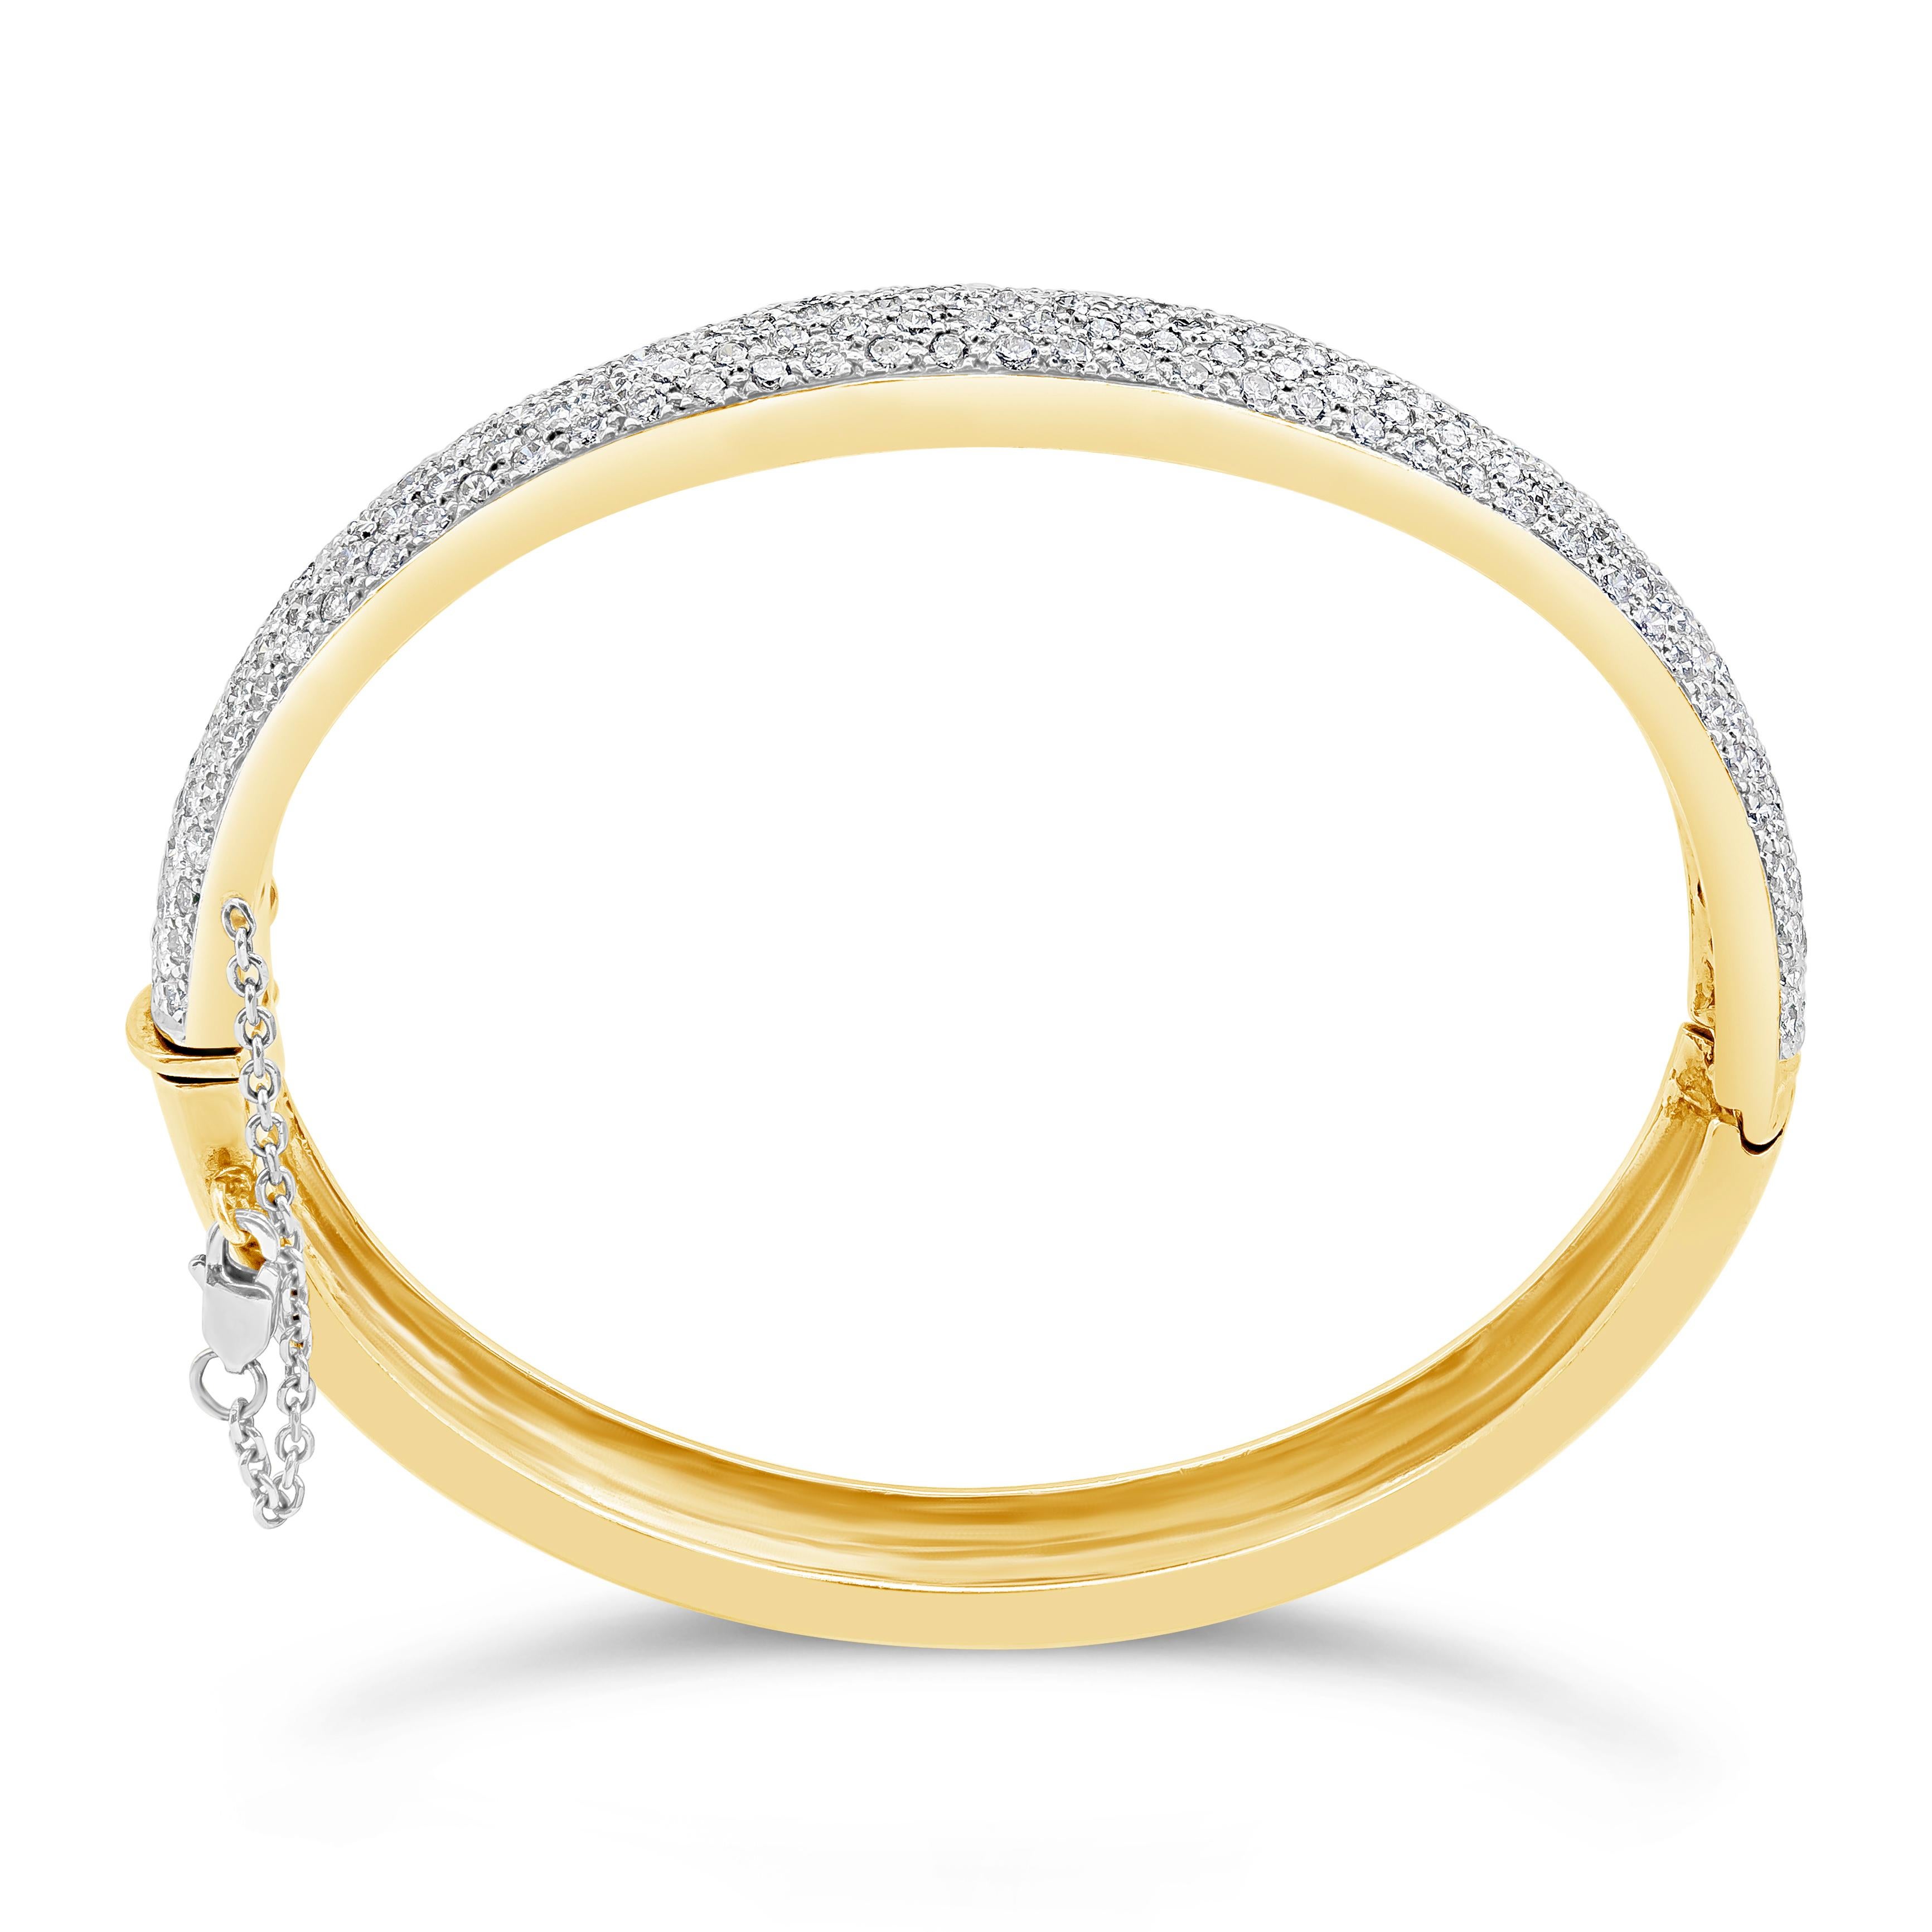 A gorgeous bangle bracelet encrusted with 11.07 carats of round brilliant diamonds. Made with 18K Yellow Gold. 7.75 inch inner circumference.

Roman Malakov is a custom house, specializing in creating anything you can imagine. If you would like to